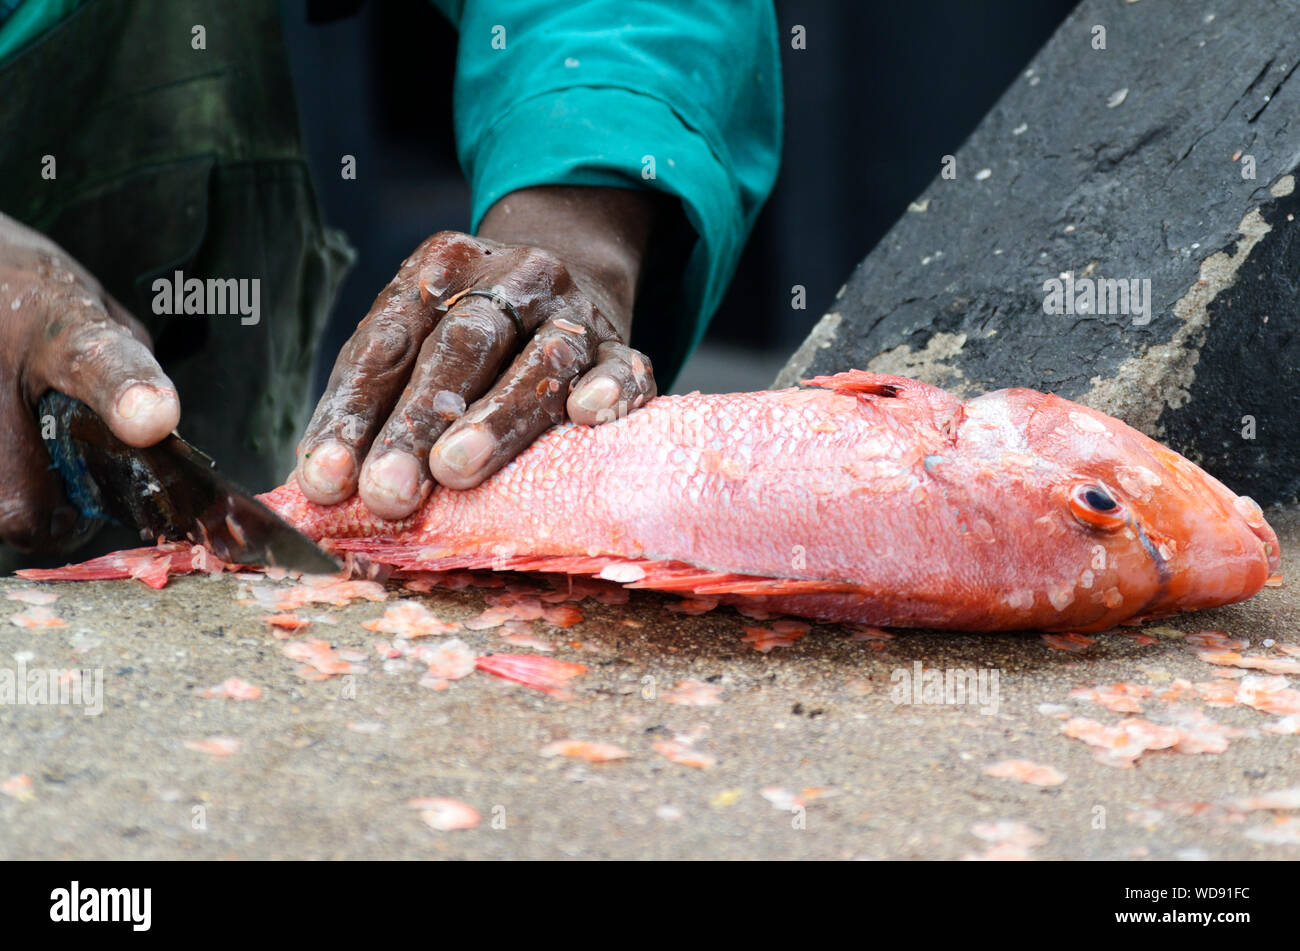 Fisherman descaling a Red Roman Fish during the cleaning process. Stock Photo